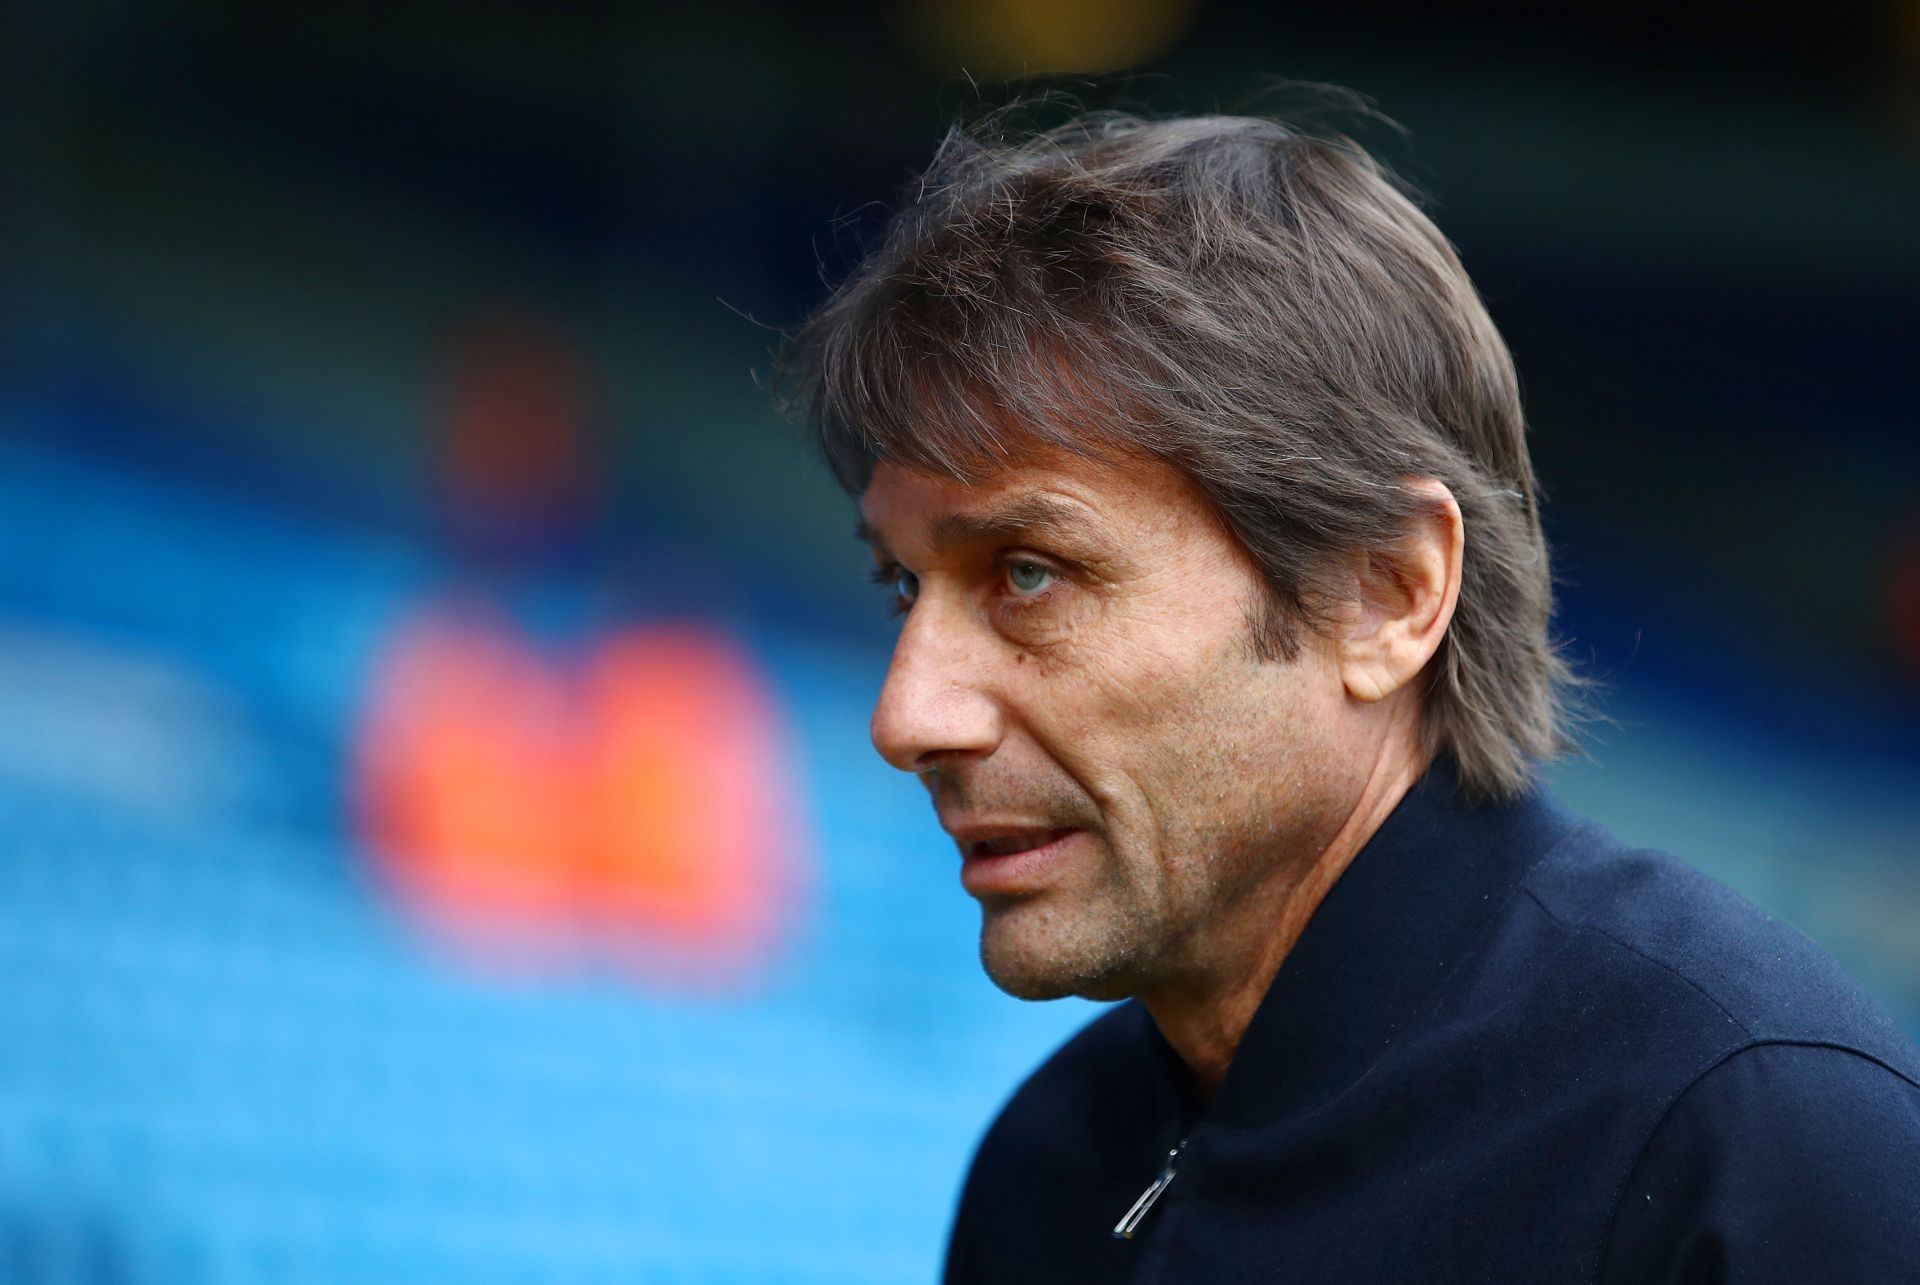 Antonio Conte is currently in charge at Tottenham Hotspur.